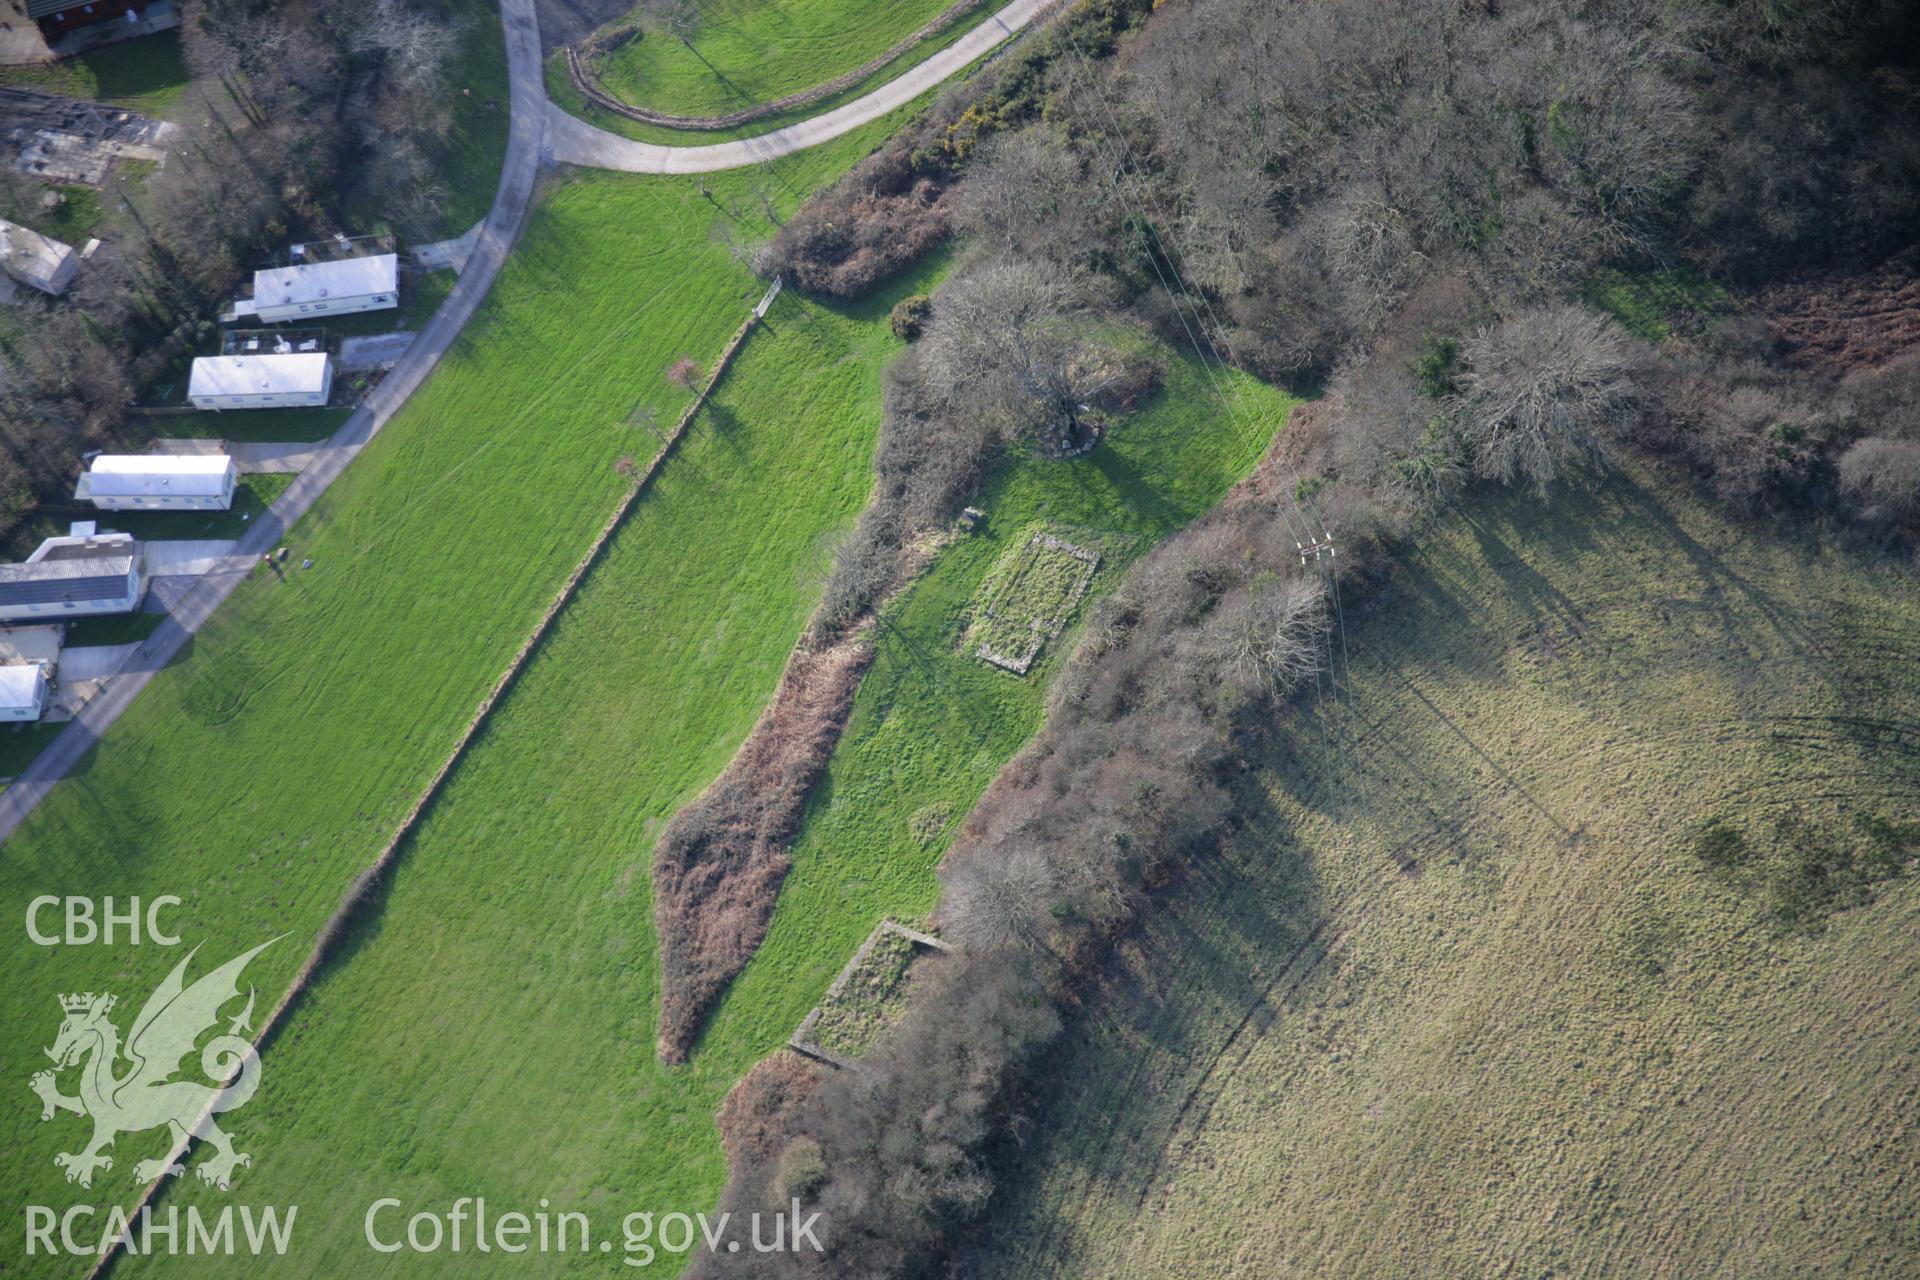 RCAHMW colour oblique aerial photograph of Llanelen chapel site, viewed from the east. Taken on 26 January 2006 by Toby Driver.